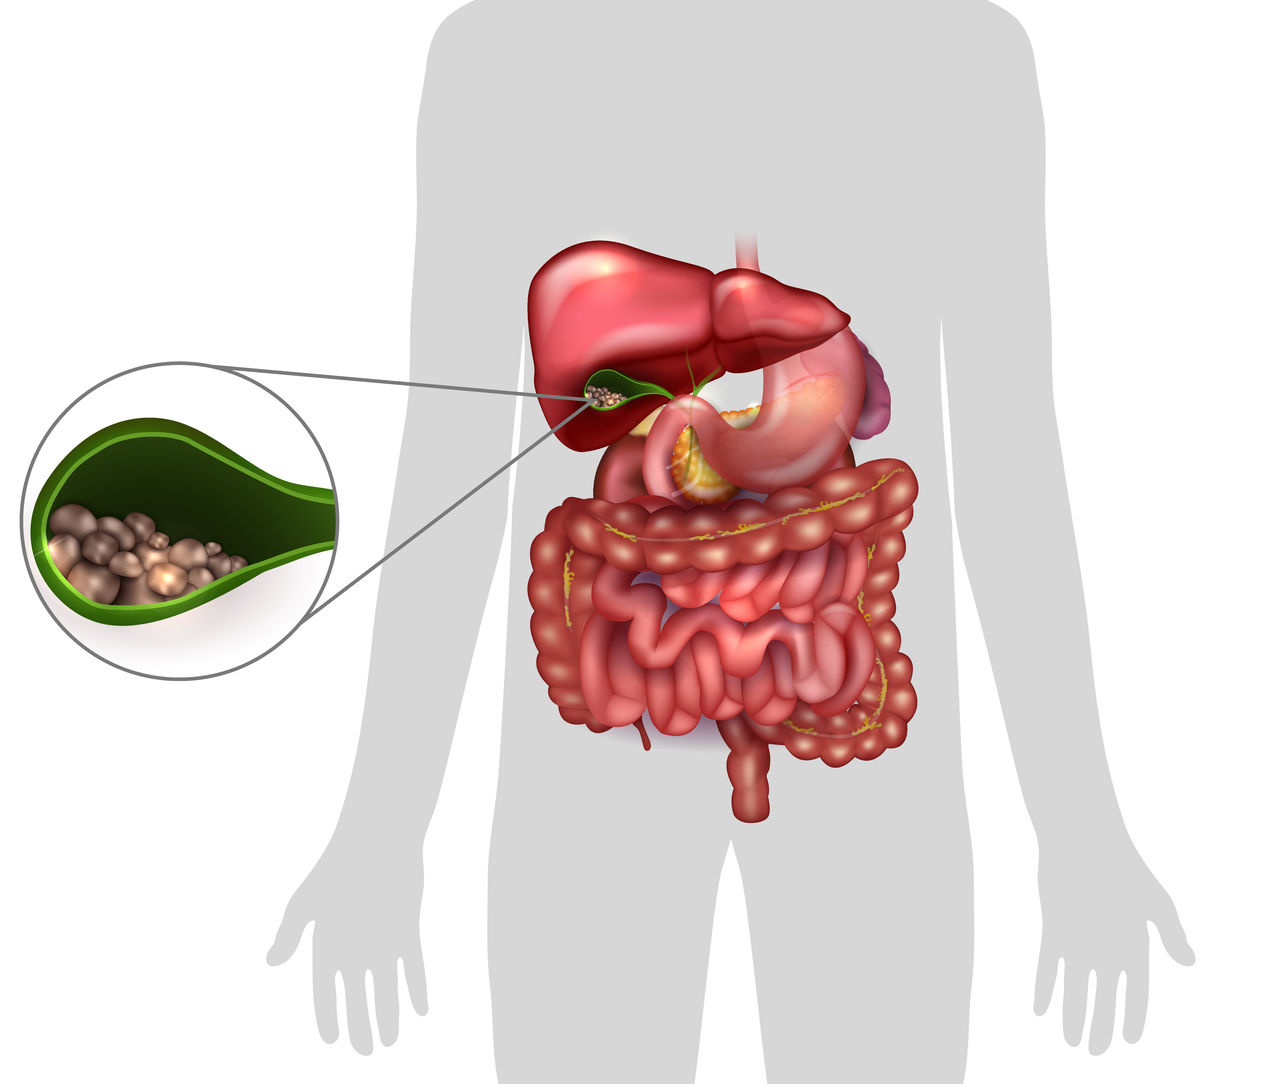 Gallstones in the Gallbladder, human silhouette and anatomy of surrounding organs.,Gallstones in the Gallbladder, human silhouette and anatomy of s